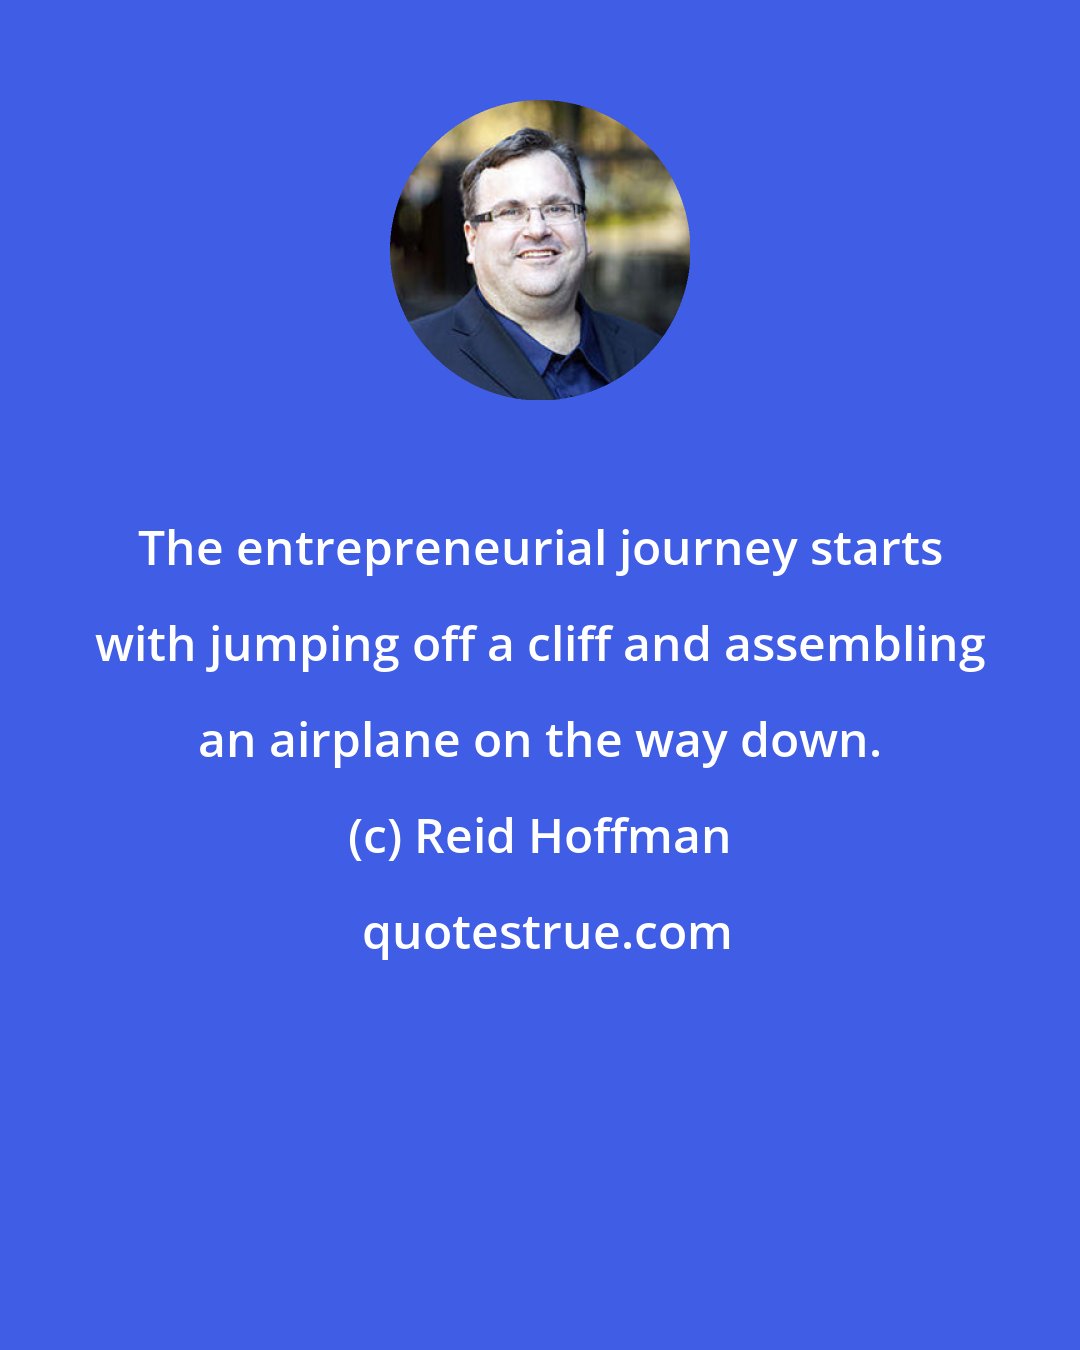 Reid Hoffman: The entrepreneurial journey starts with jumping off a cliff and assembling an airplane on the way down.